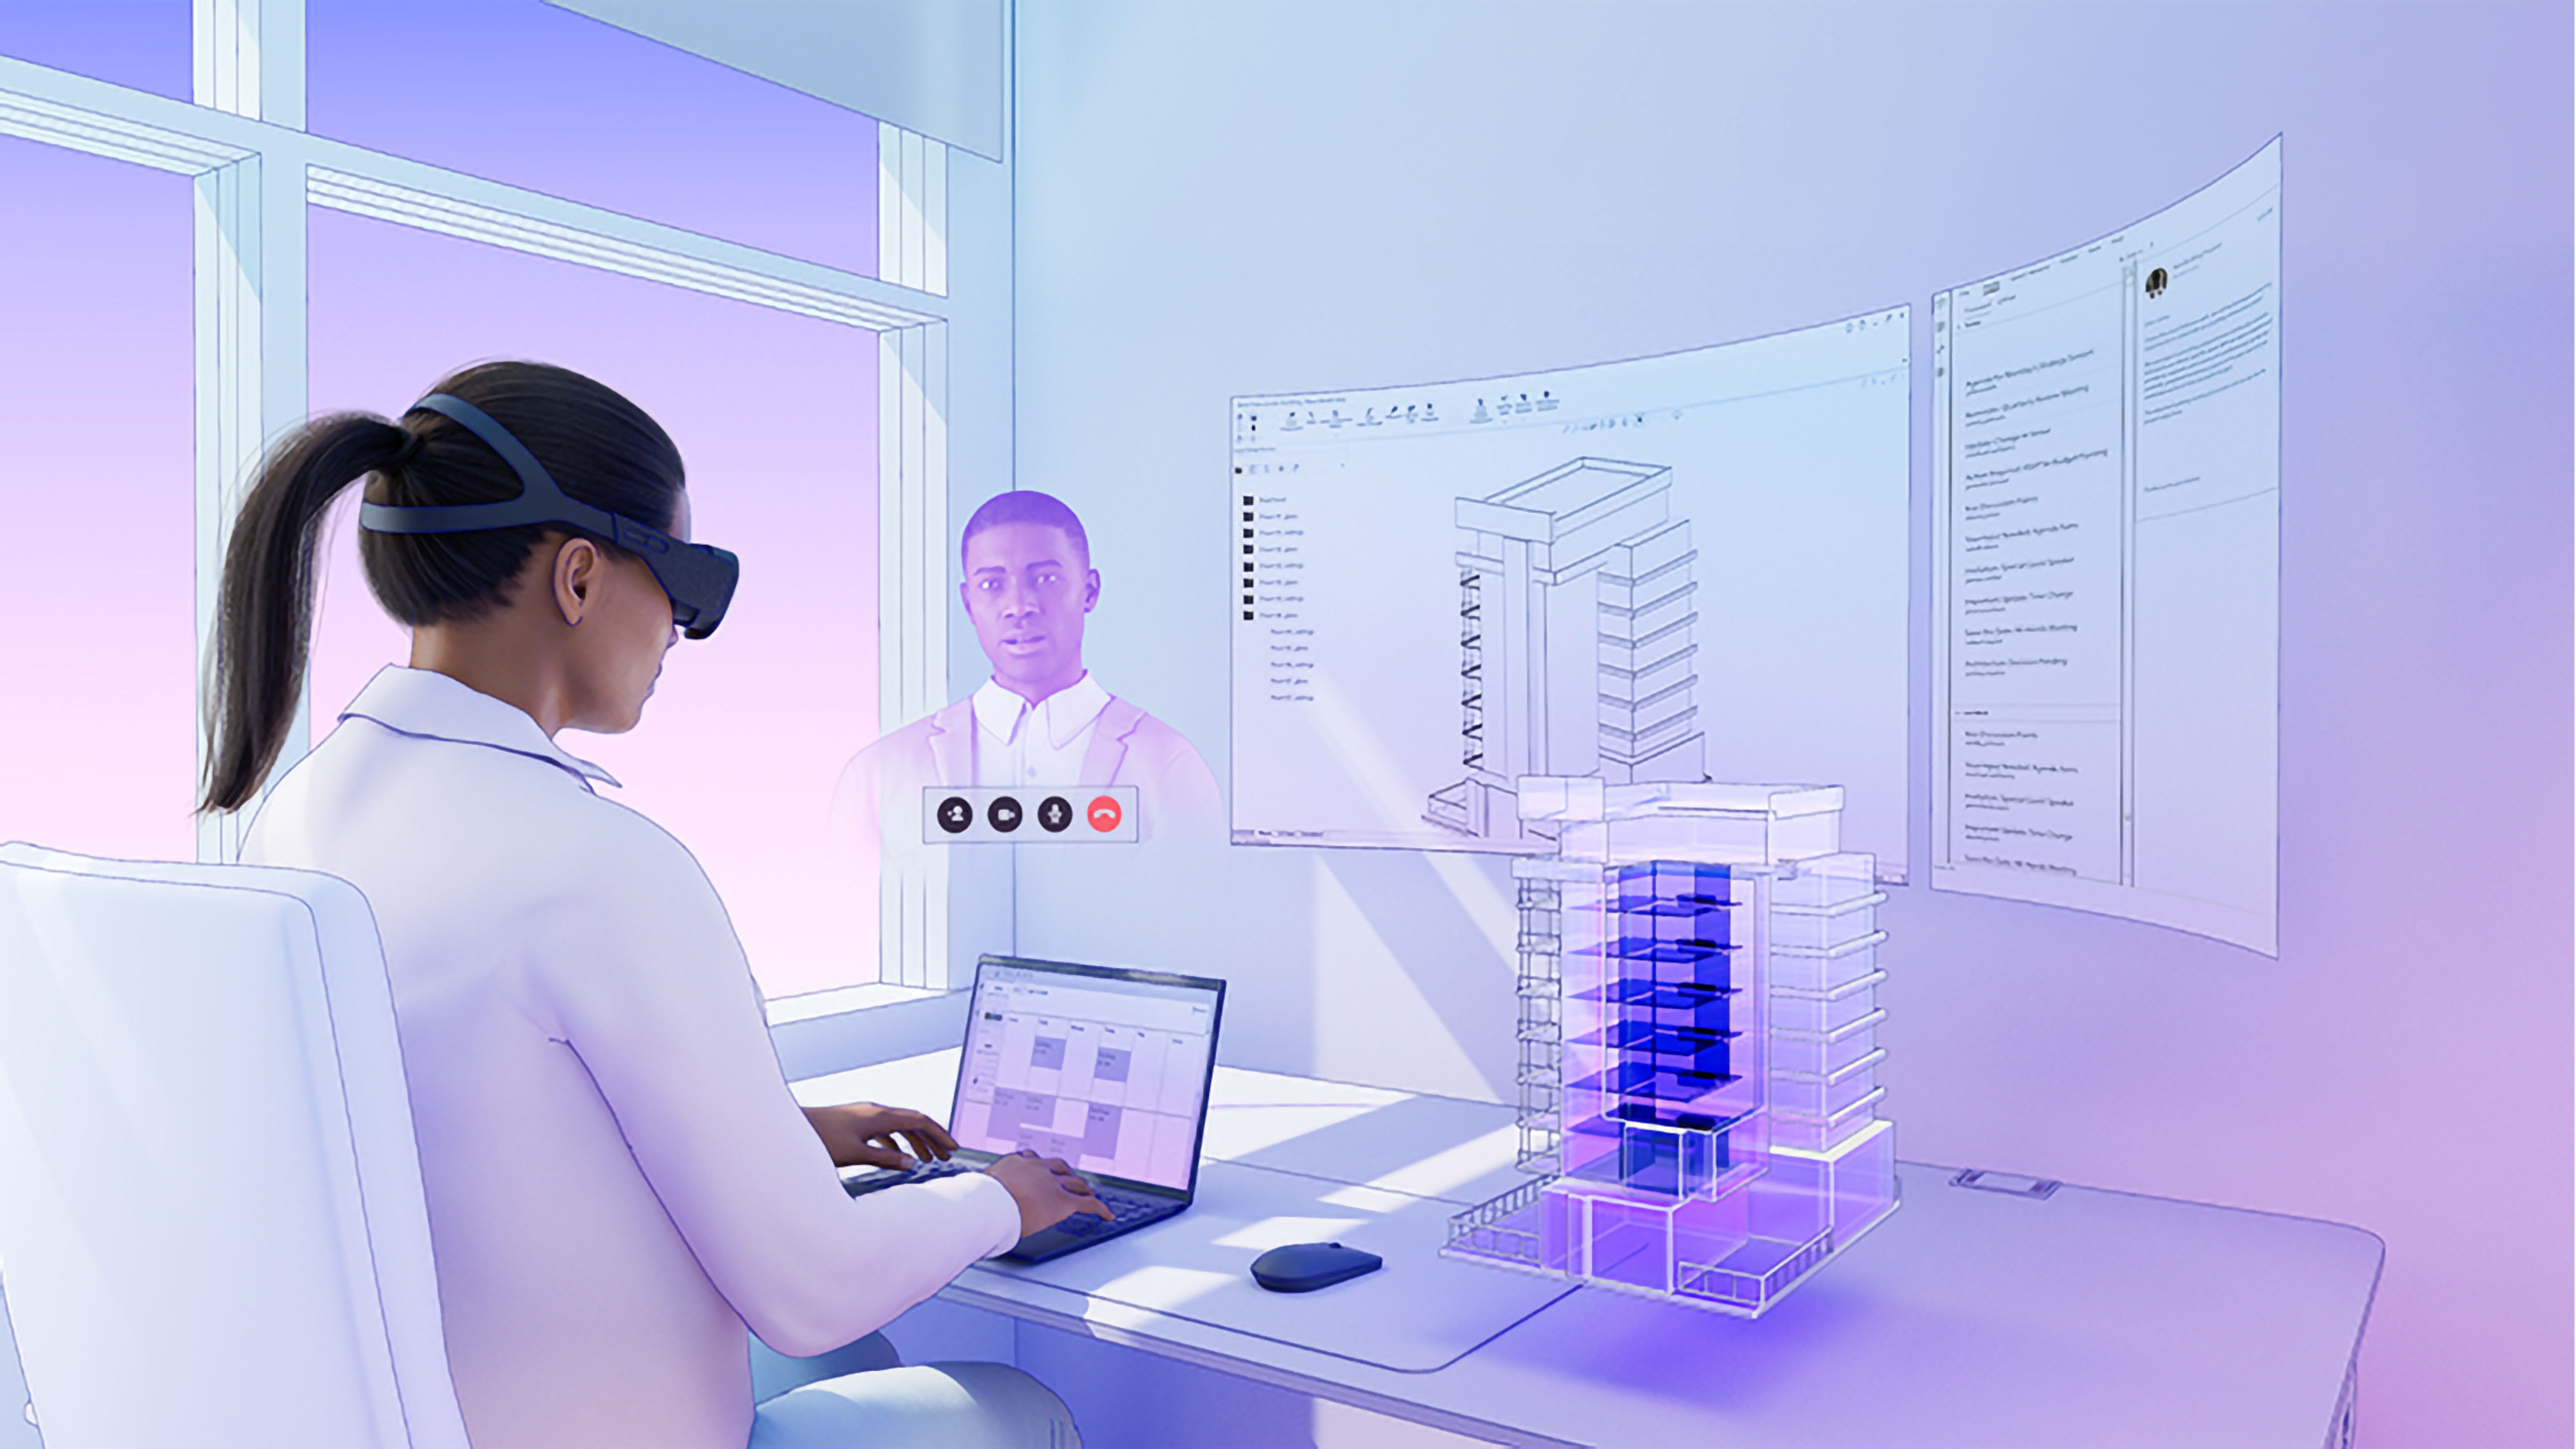 Meta's visualization of a mixed reality headset being used in an office.